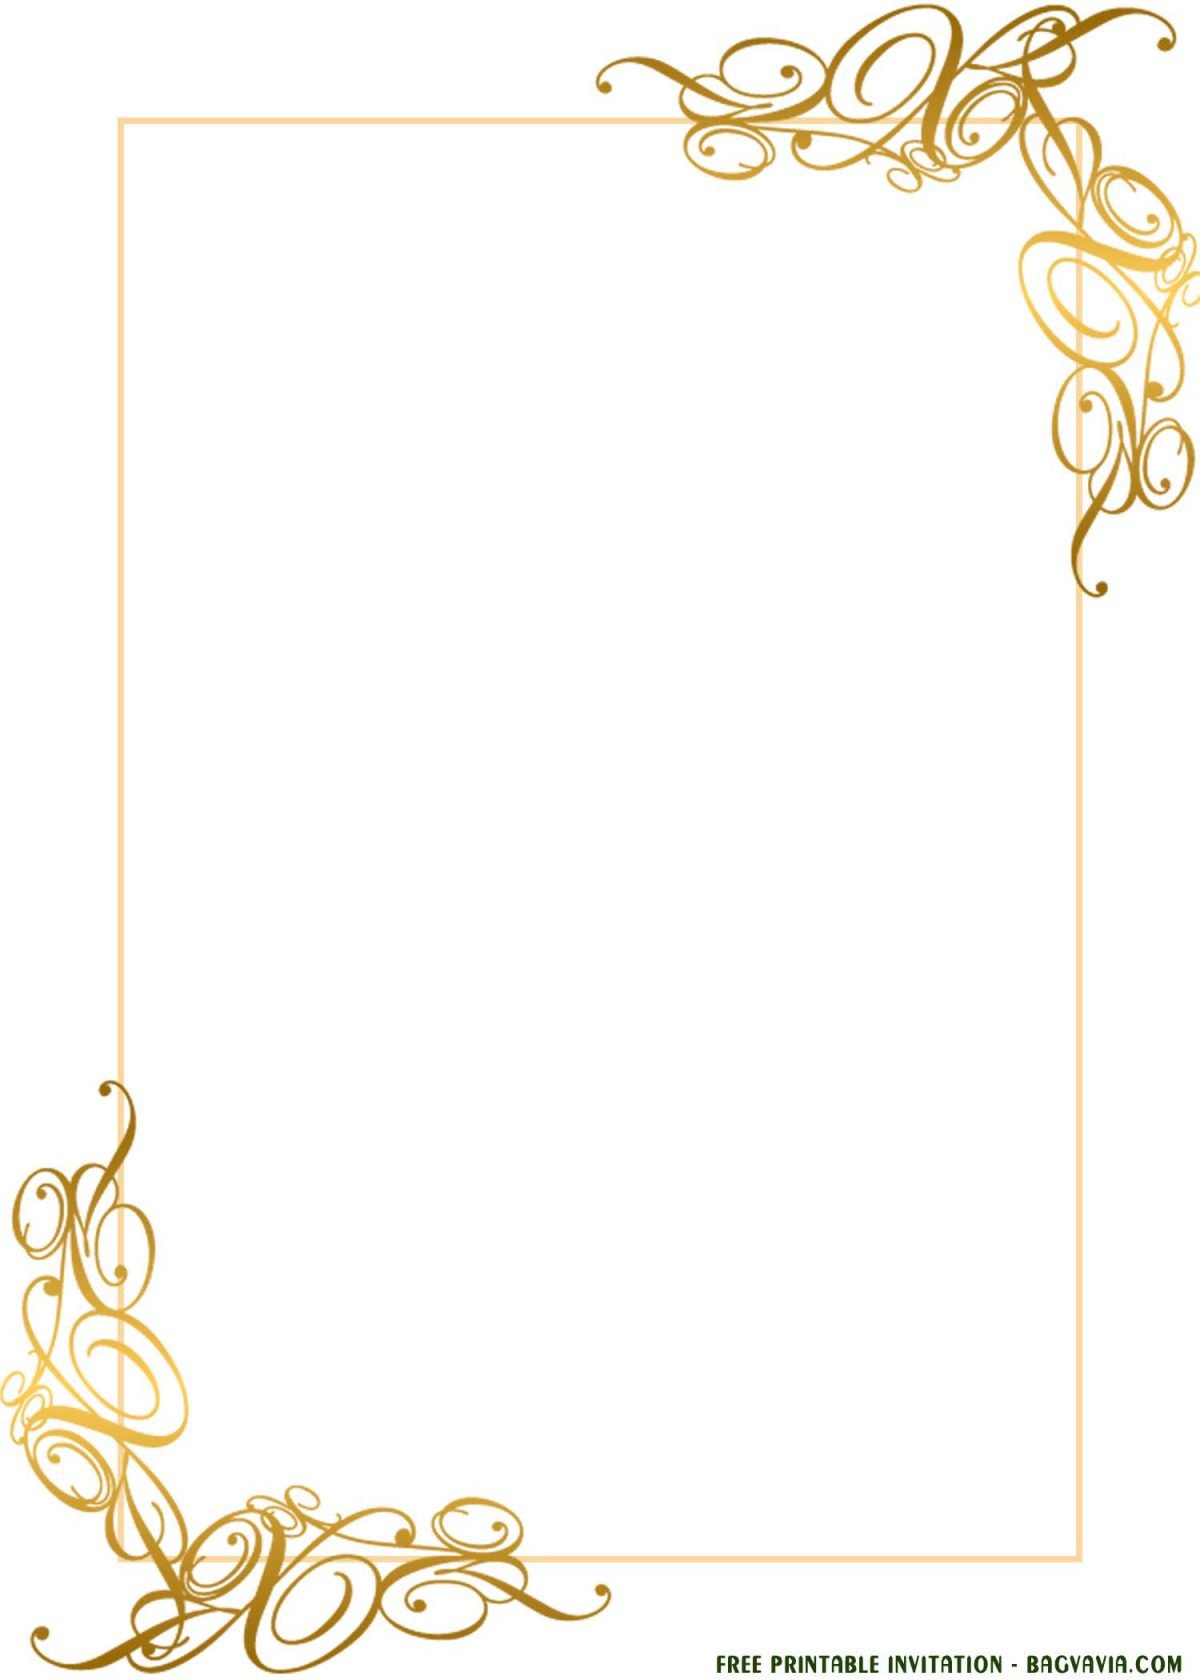  FREE Printable Gold Lace Invitation Templates For Any Occasions FREE Printable Birthday